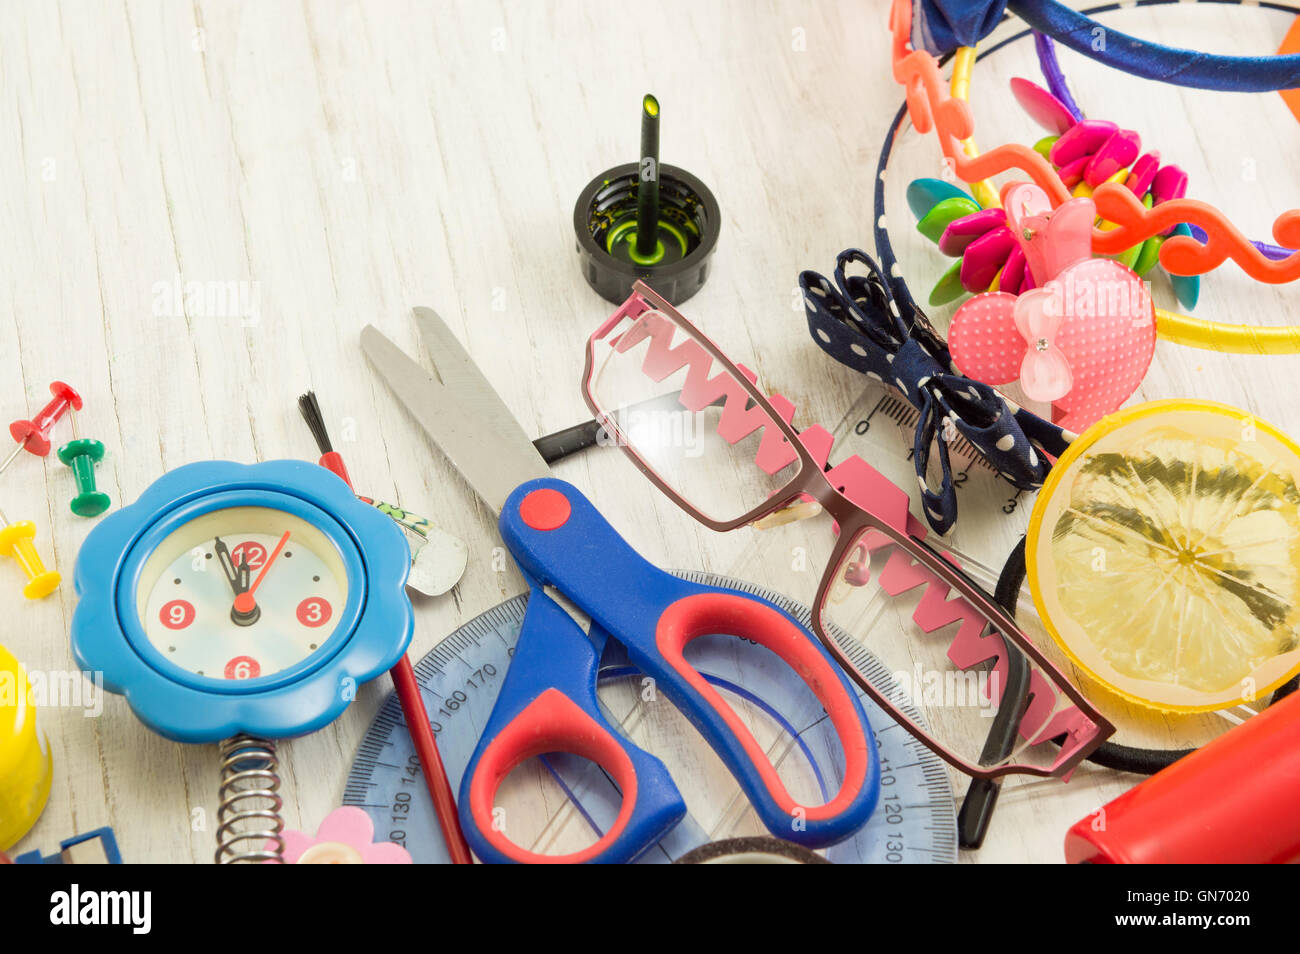 Creative chaos of learning tools for new school year Stock Photo